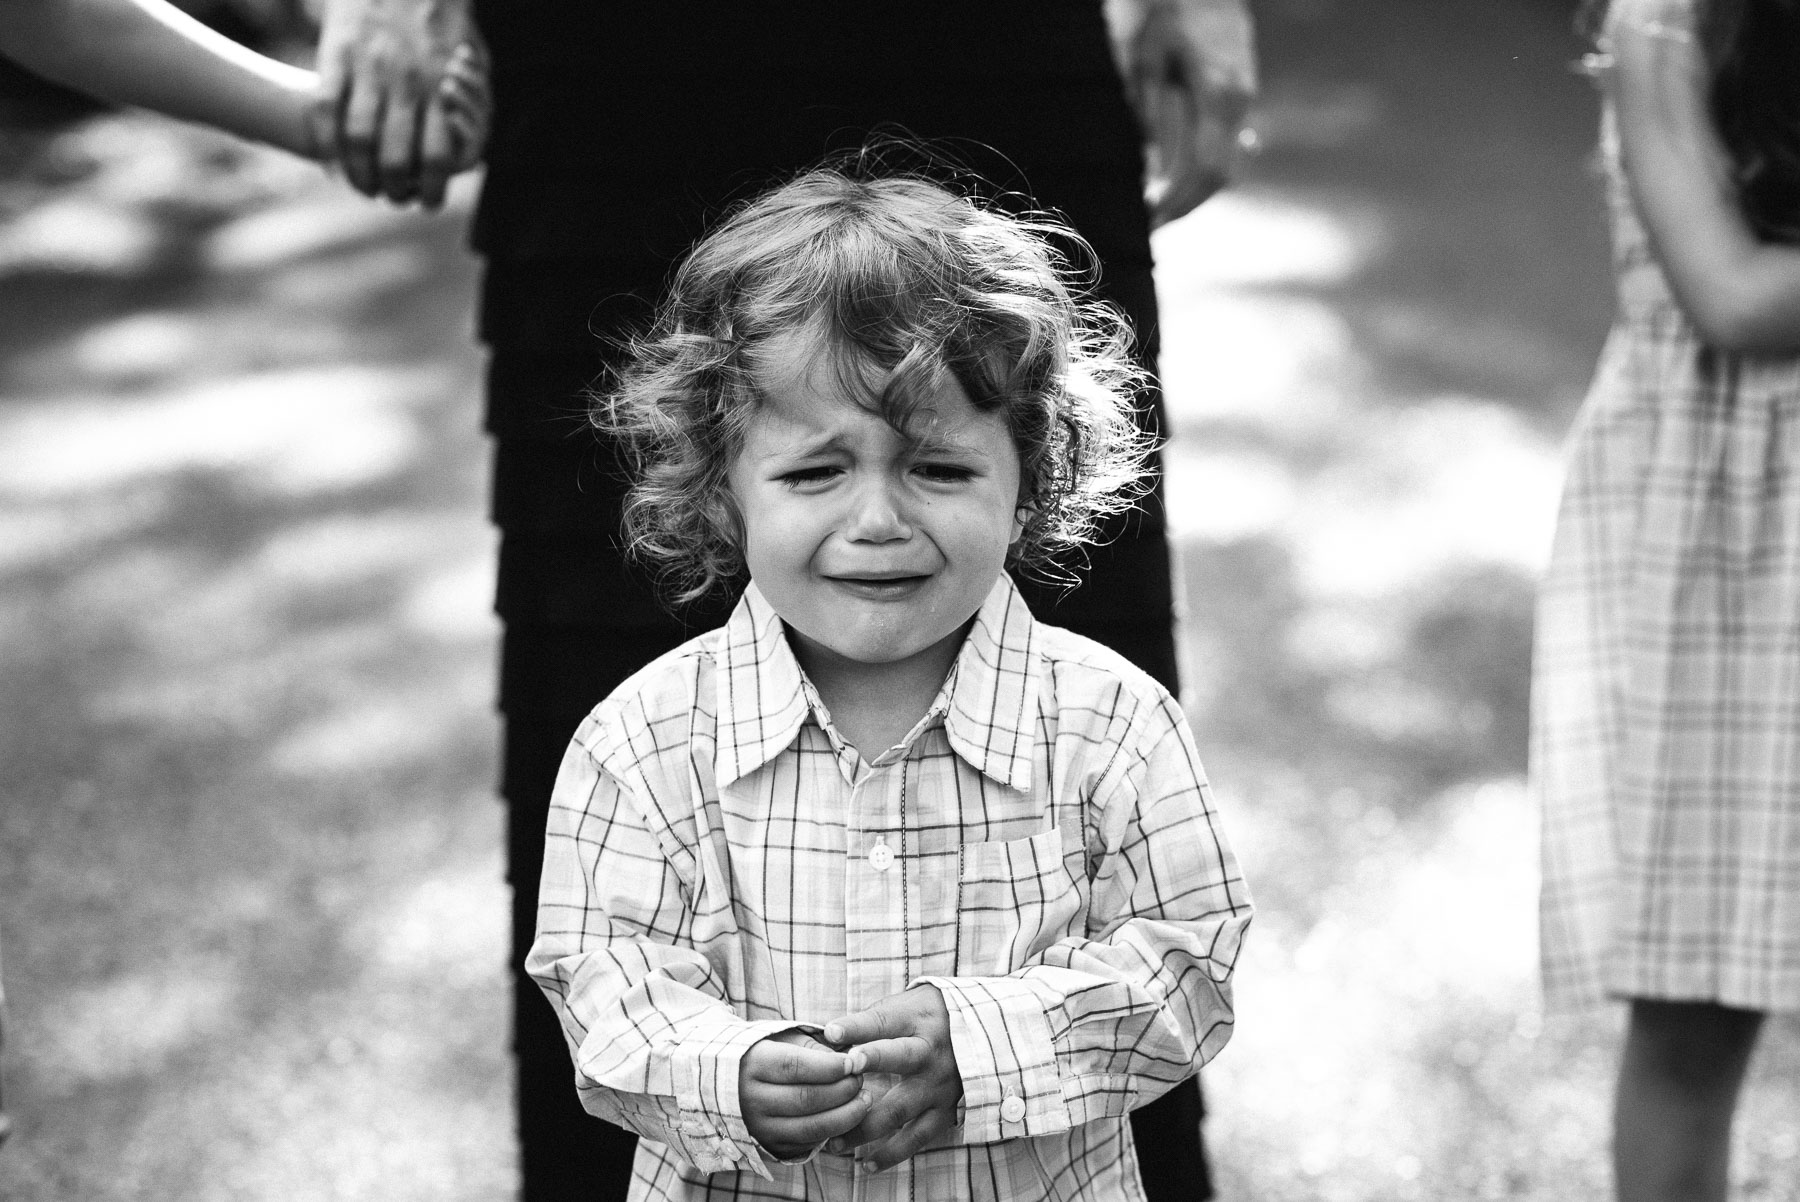 Toddler boy with curly hair crying outside